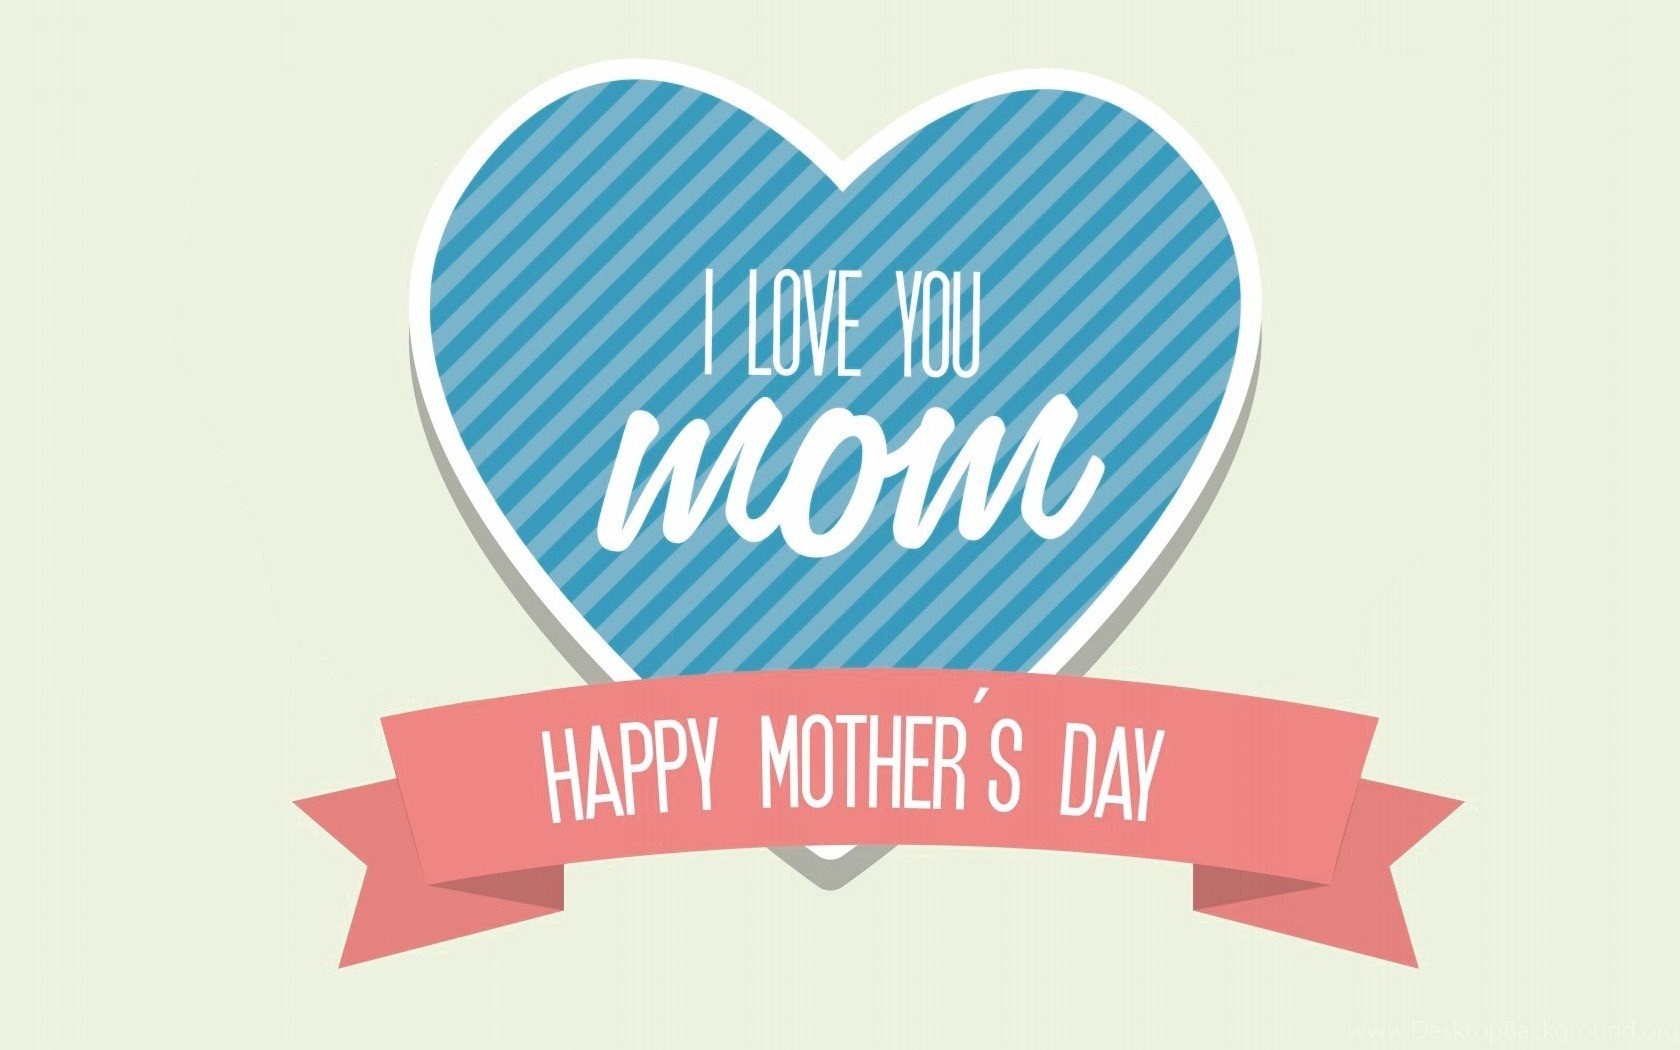 I Love You Mom Hd Wallpapers With Heart Download Free Desktop Background